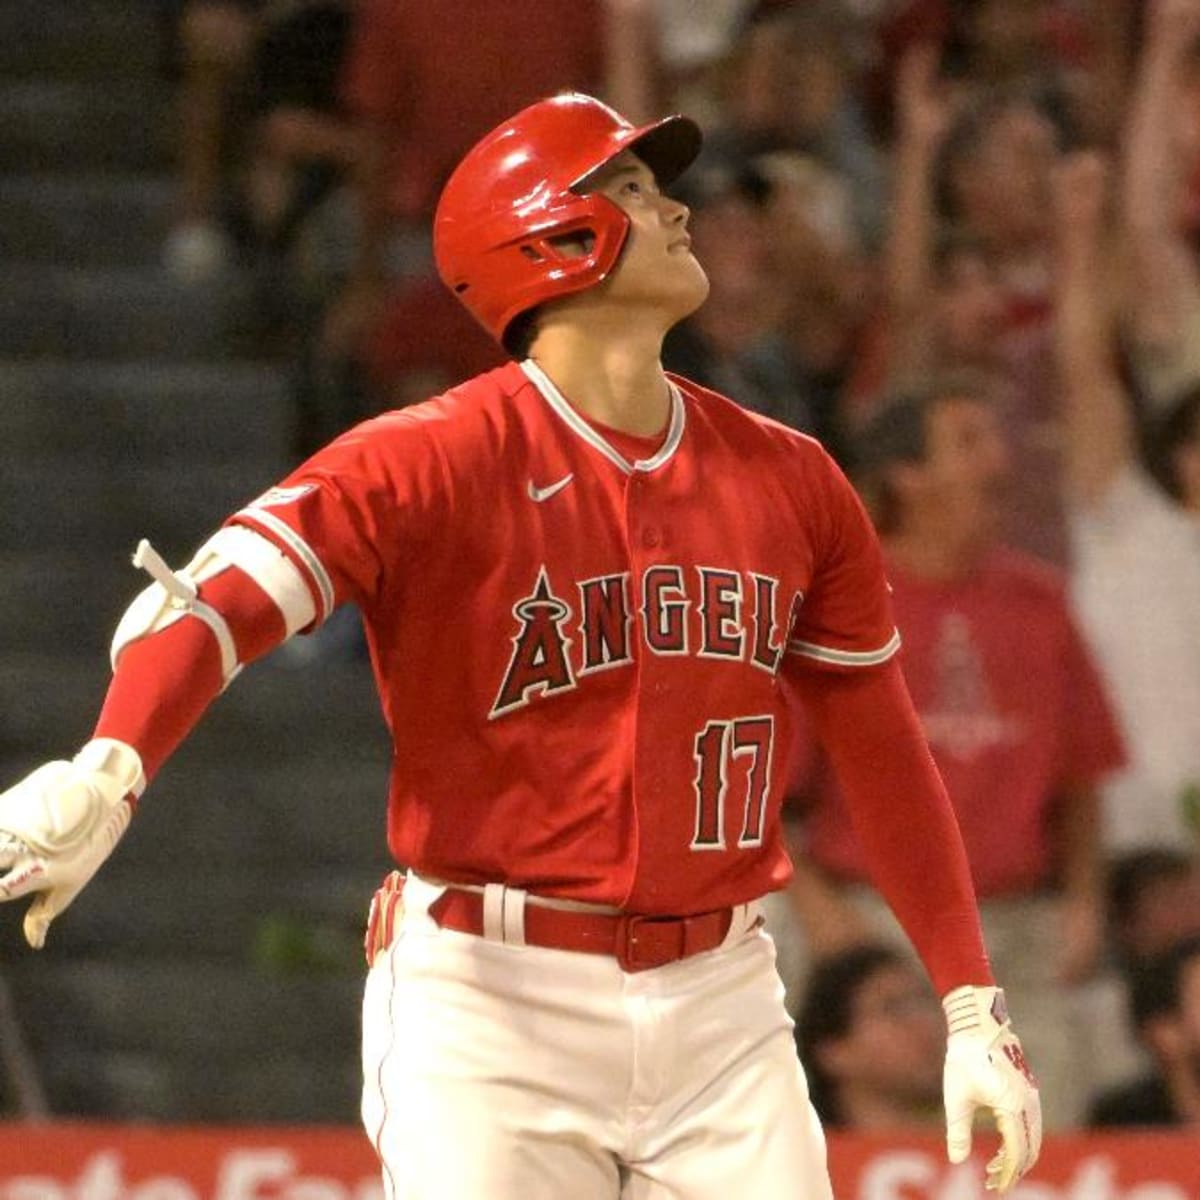 Mets Fans Should Be Excited About Latest Shohei Ohtani News; Could